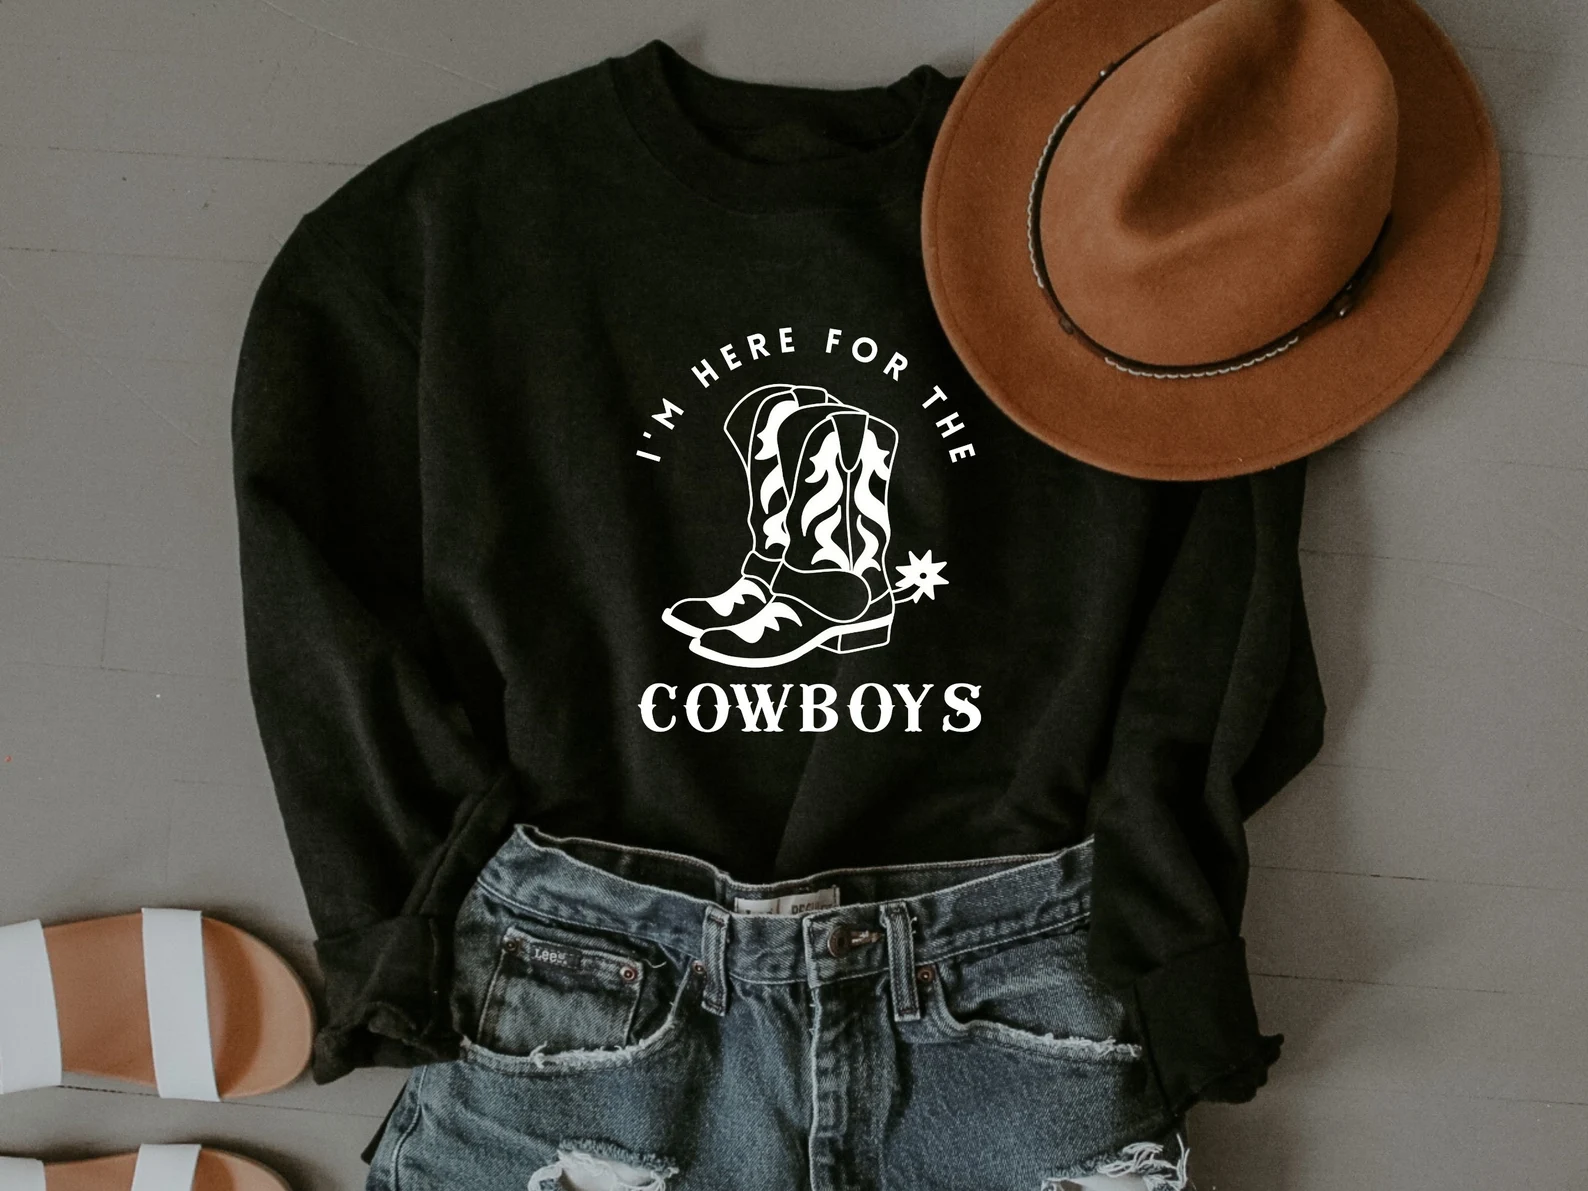 Black t-shirt with white cowboy boots.